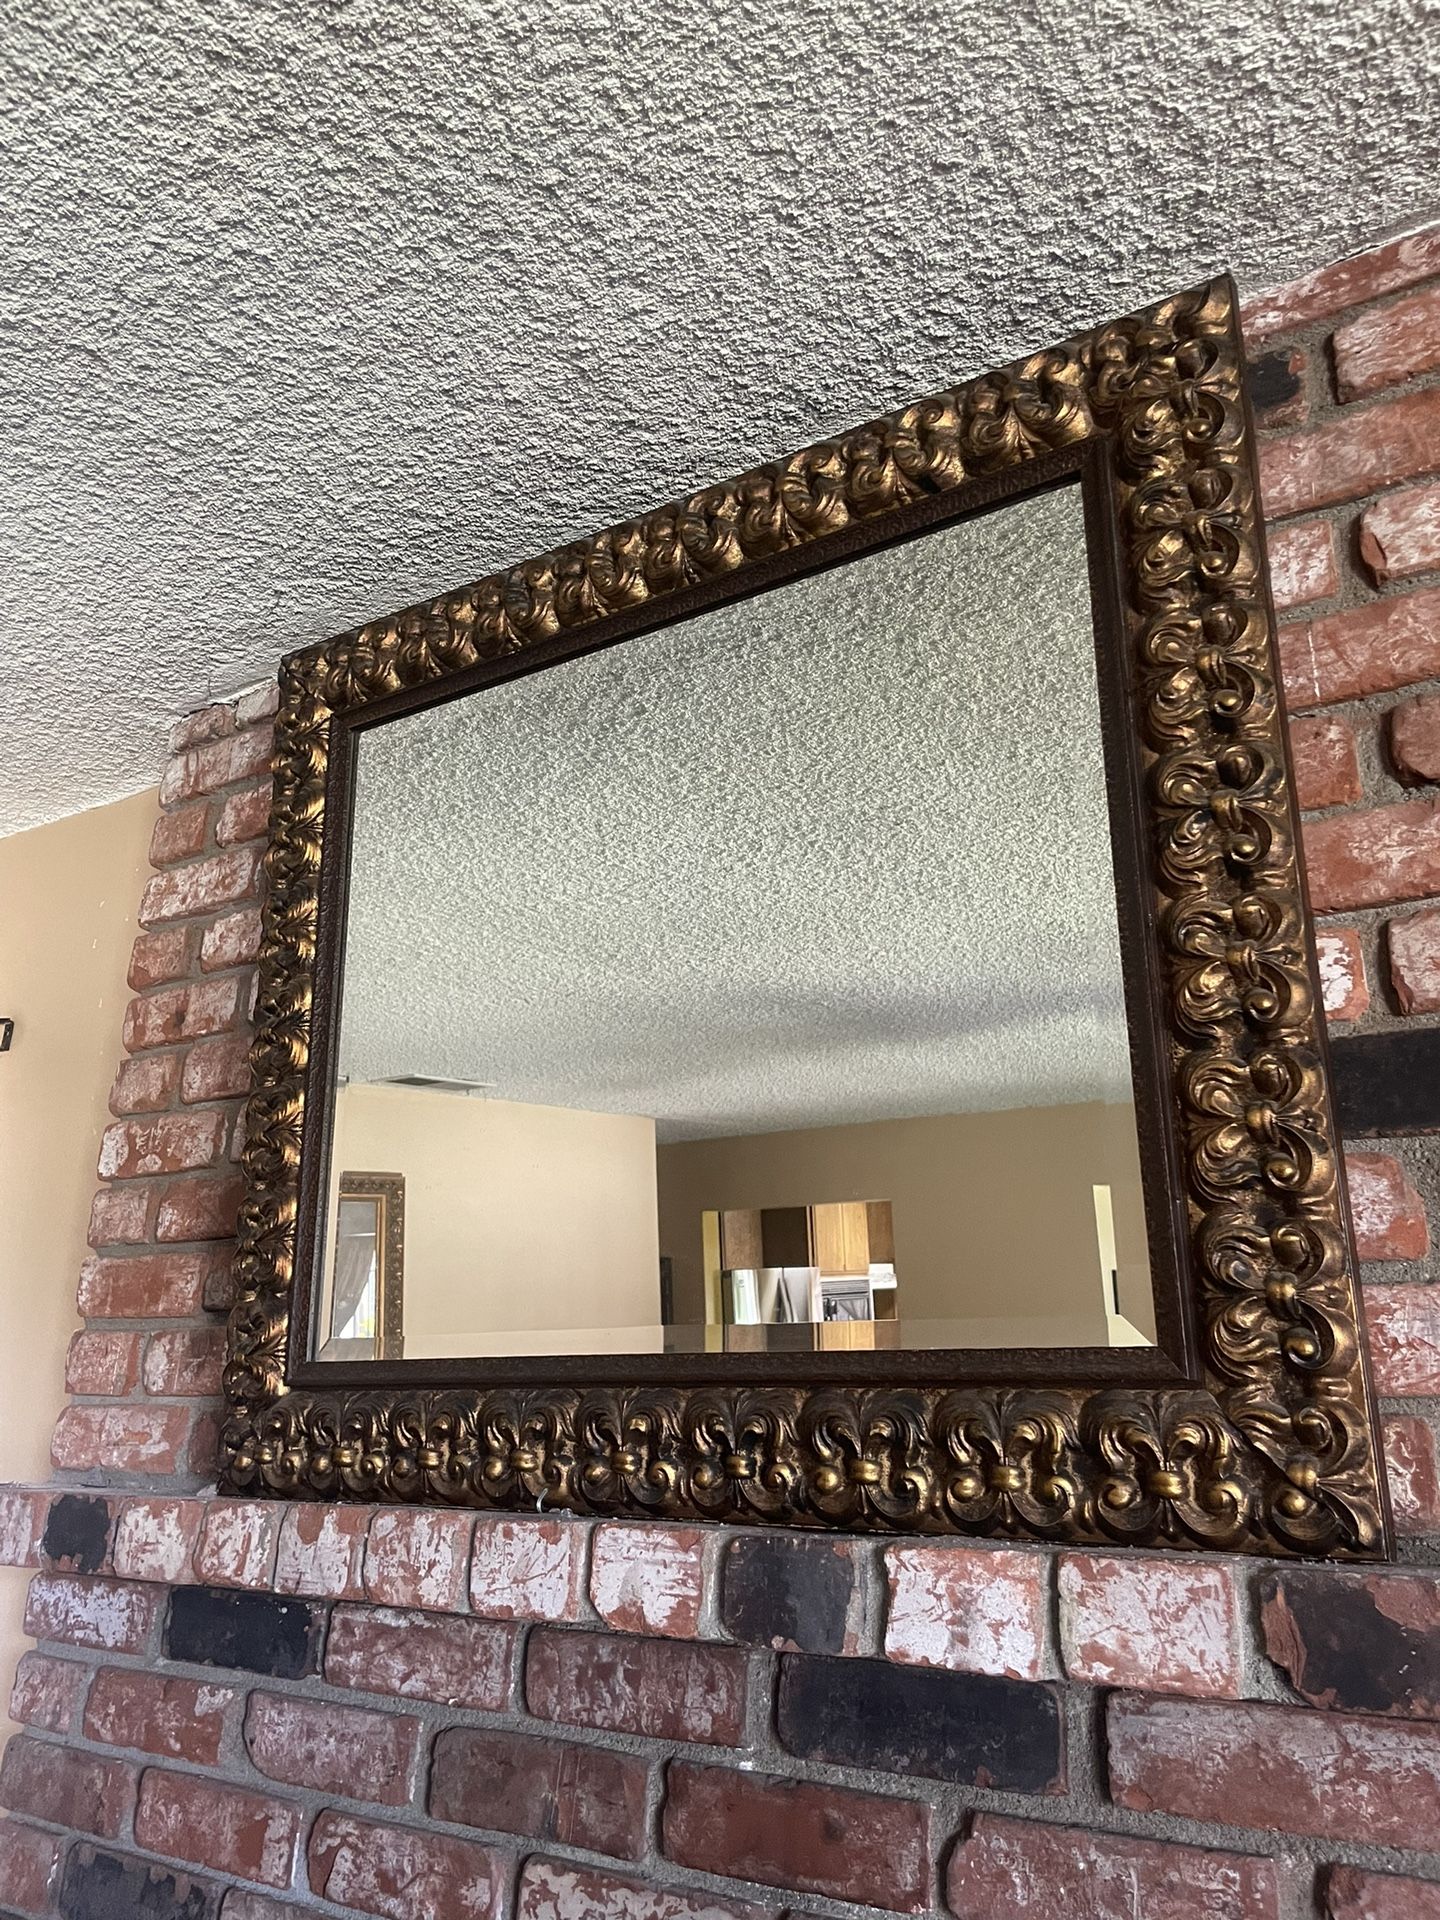 Large Mirror And Candle Holders